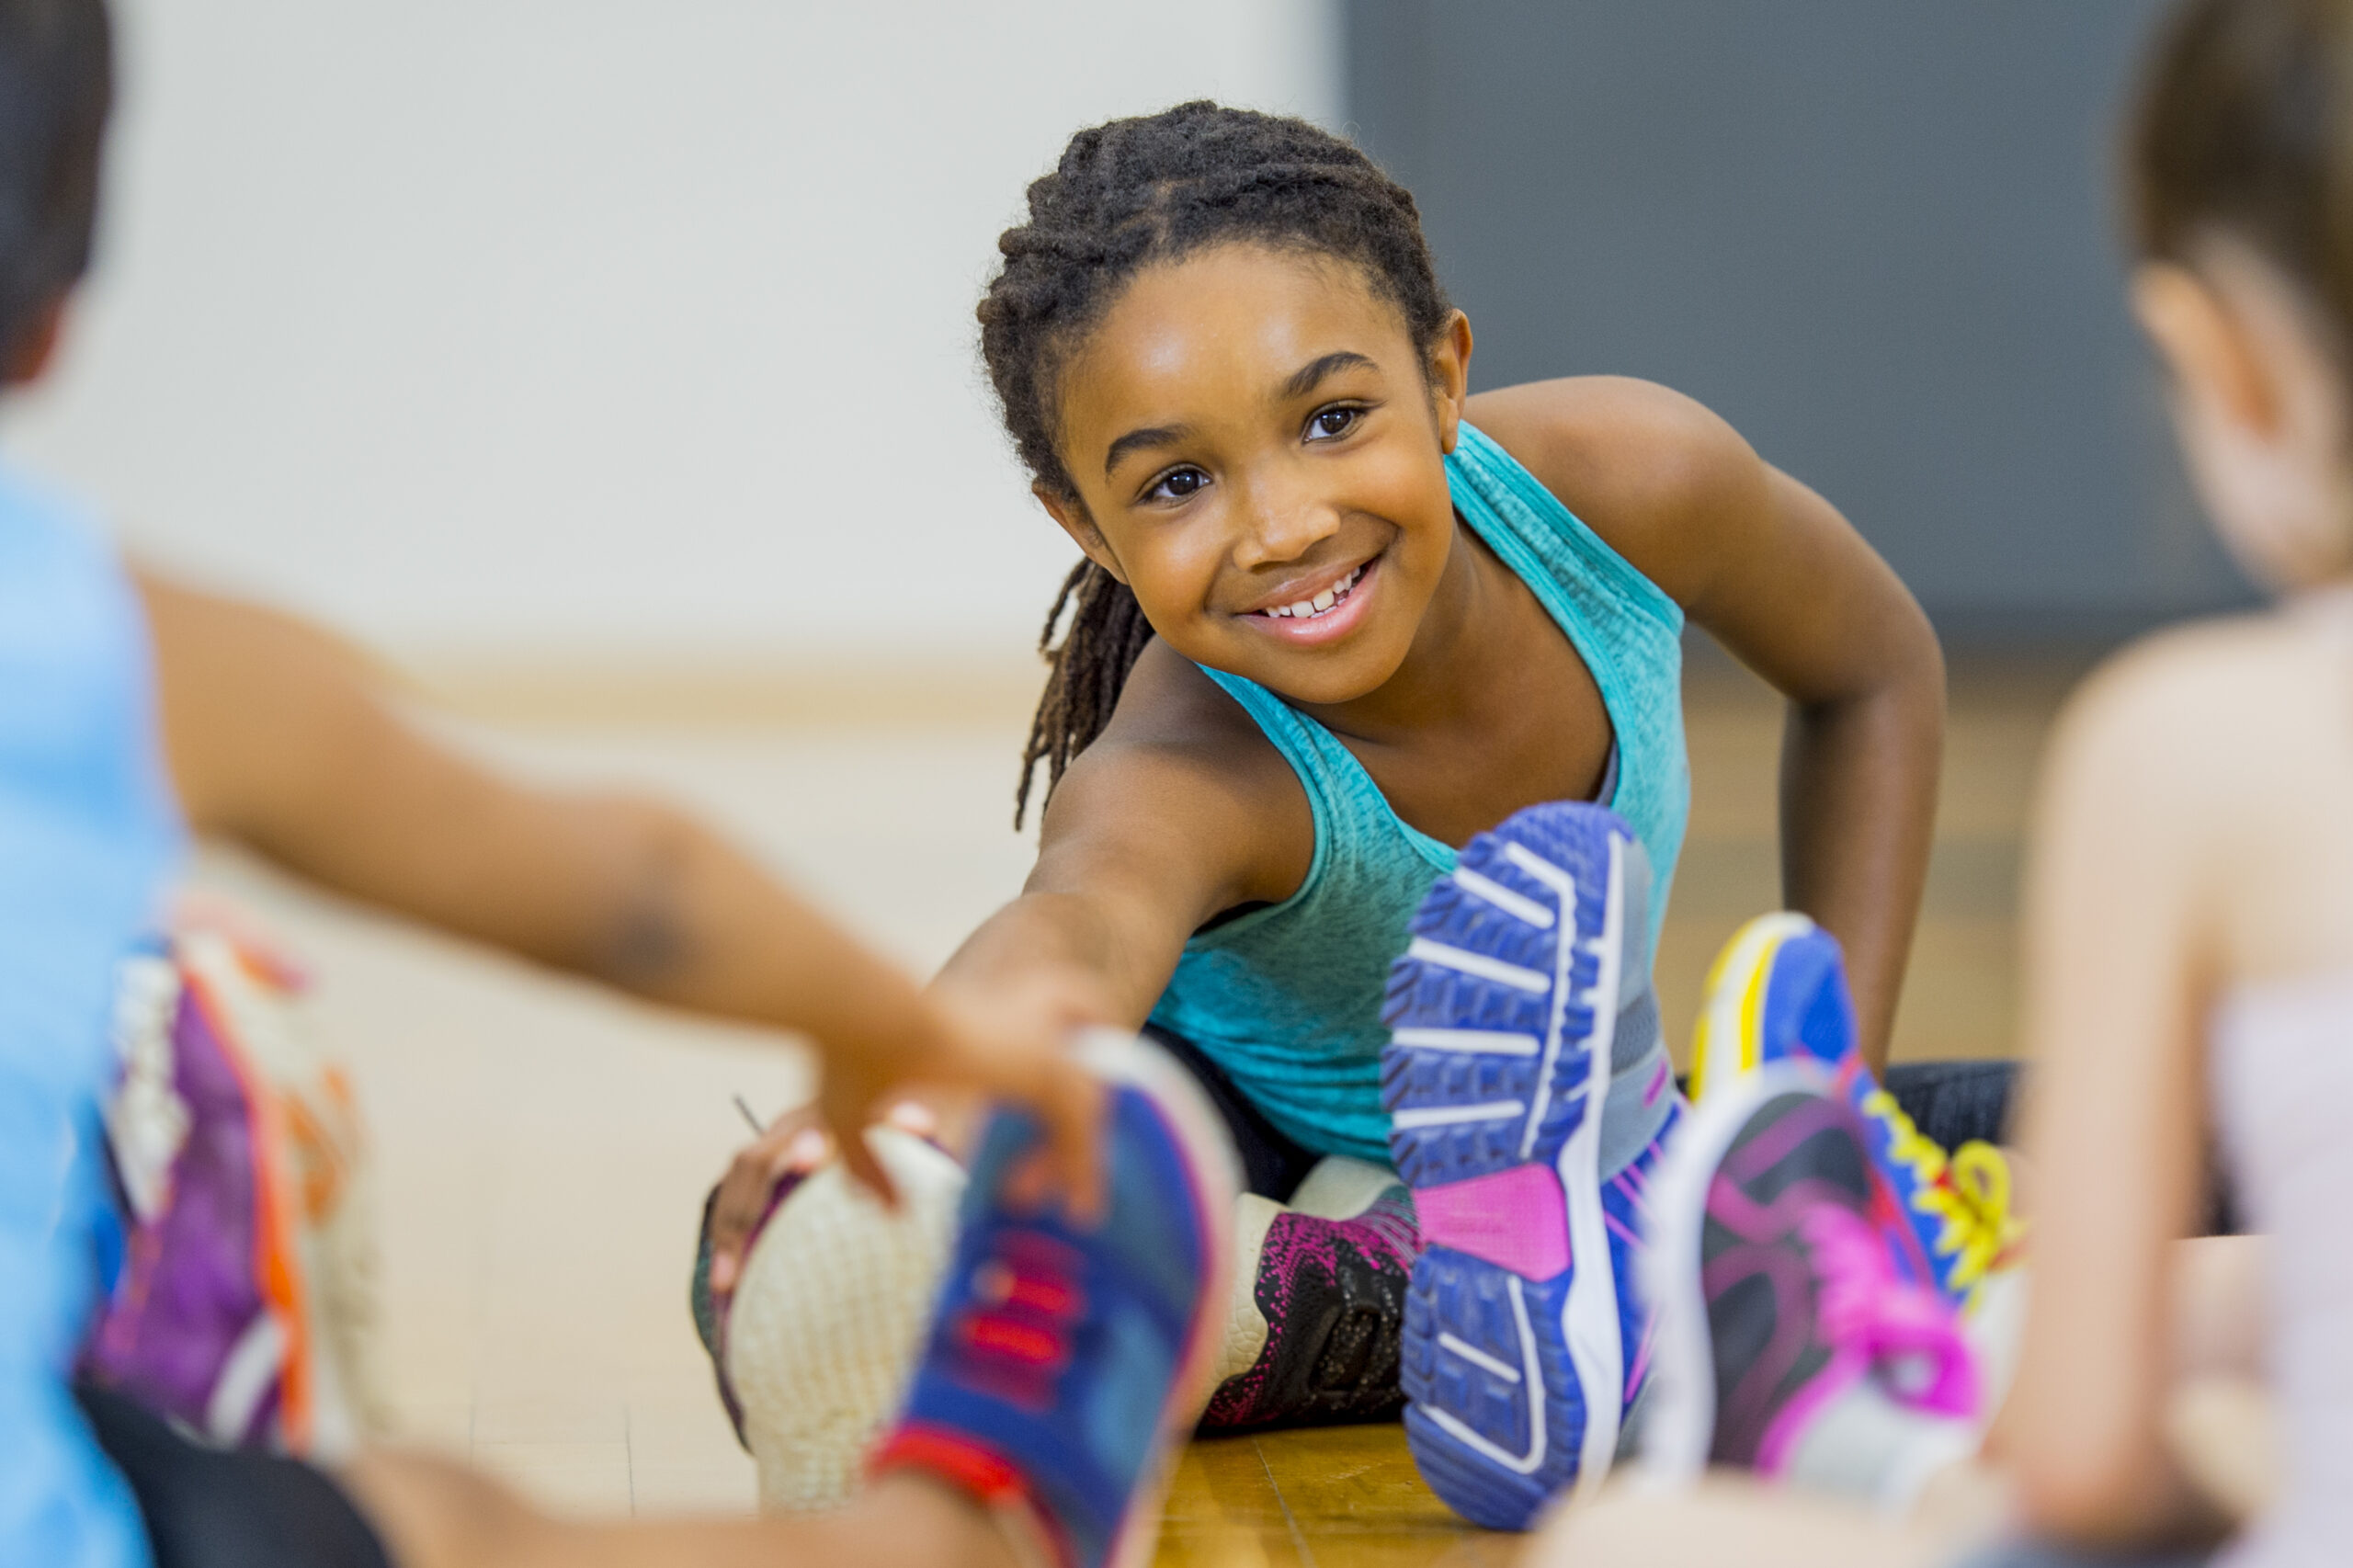 A young African American girl leads a stretch during gym class as part of their yoga routine.